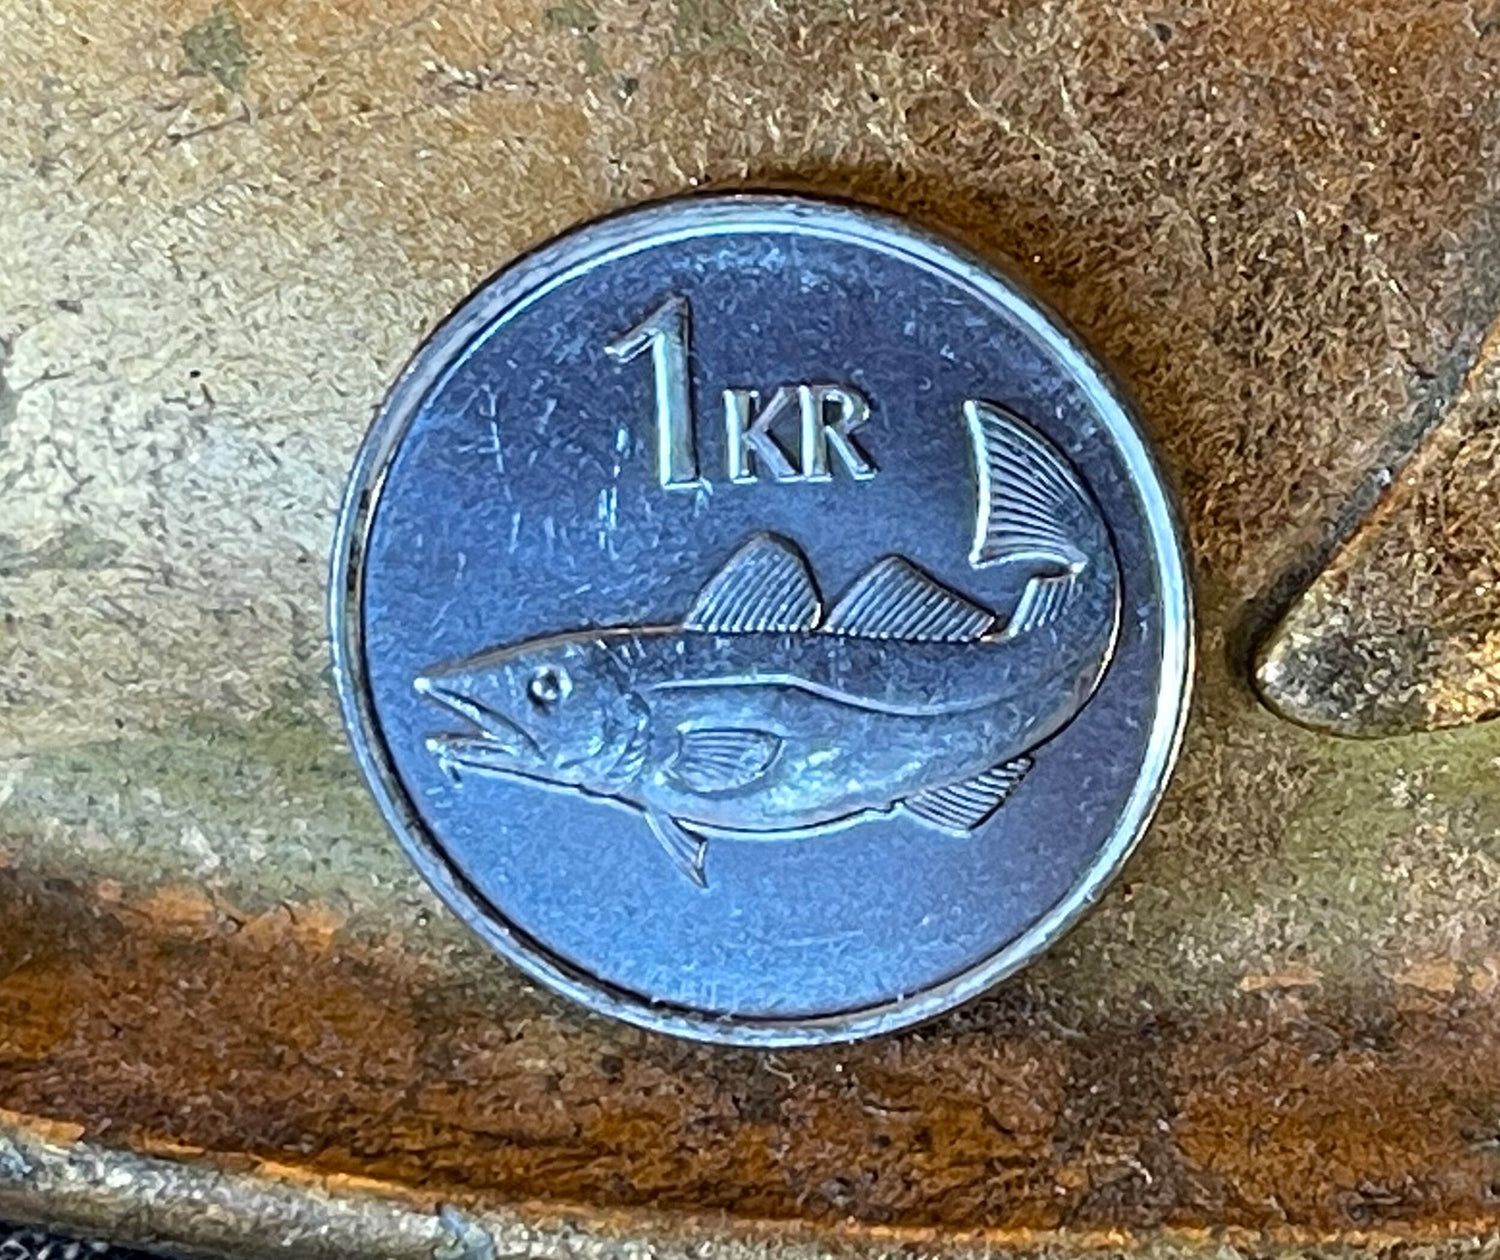 Giant Bergrisi & Cod Fish Krona Iceland Authentic Coin Money for Jewelry and Crafting Making